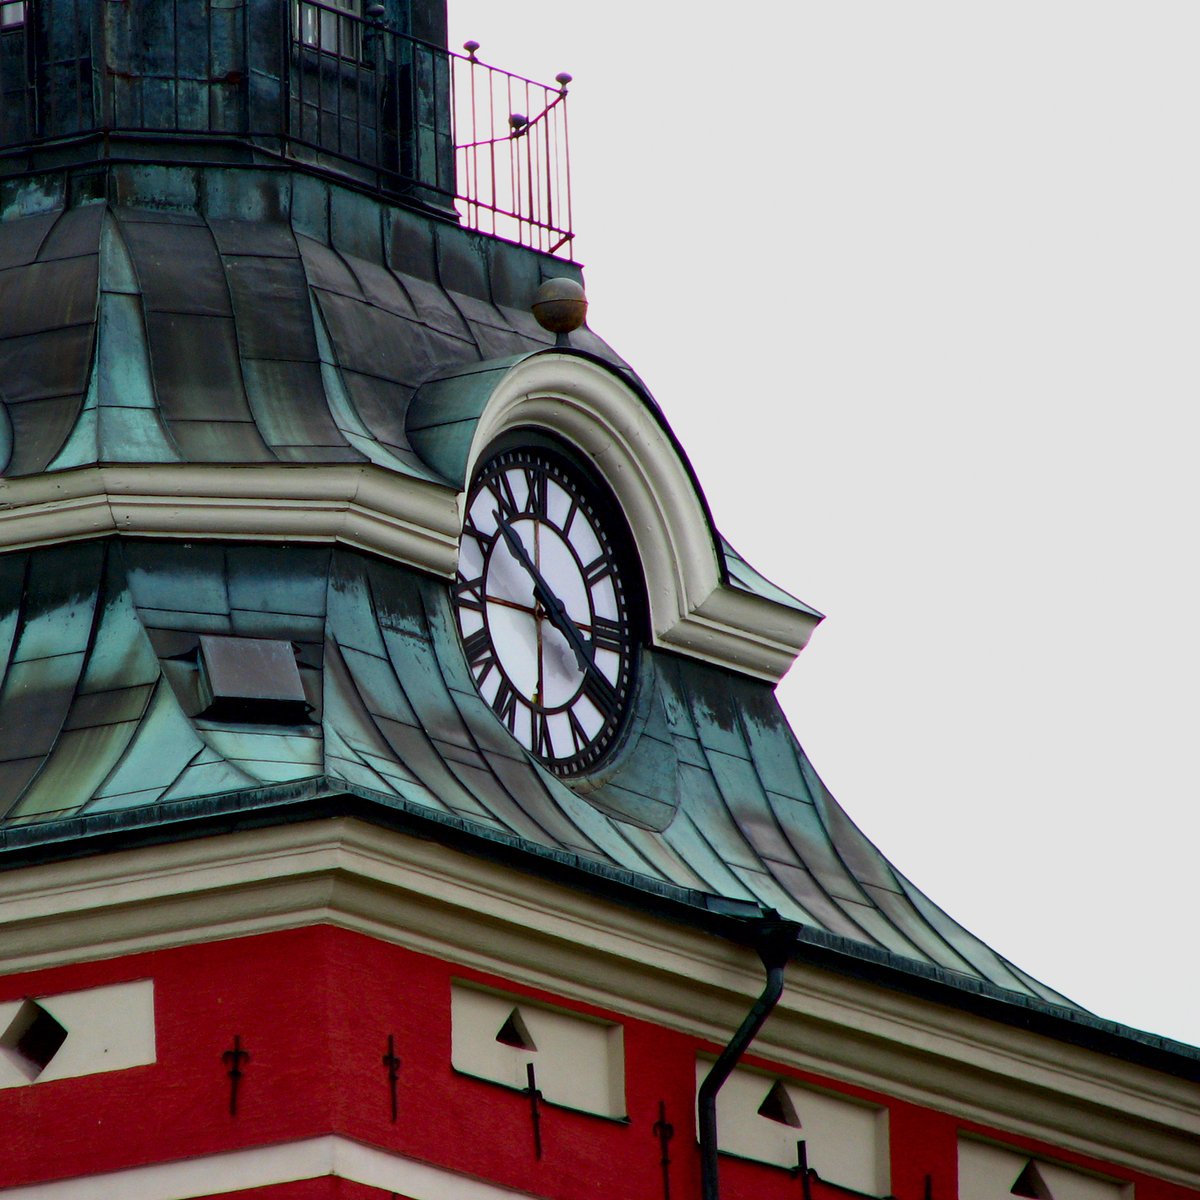 a clock on the top of a tower at dawn